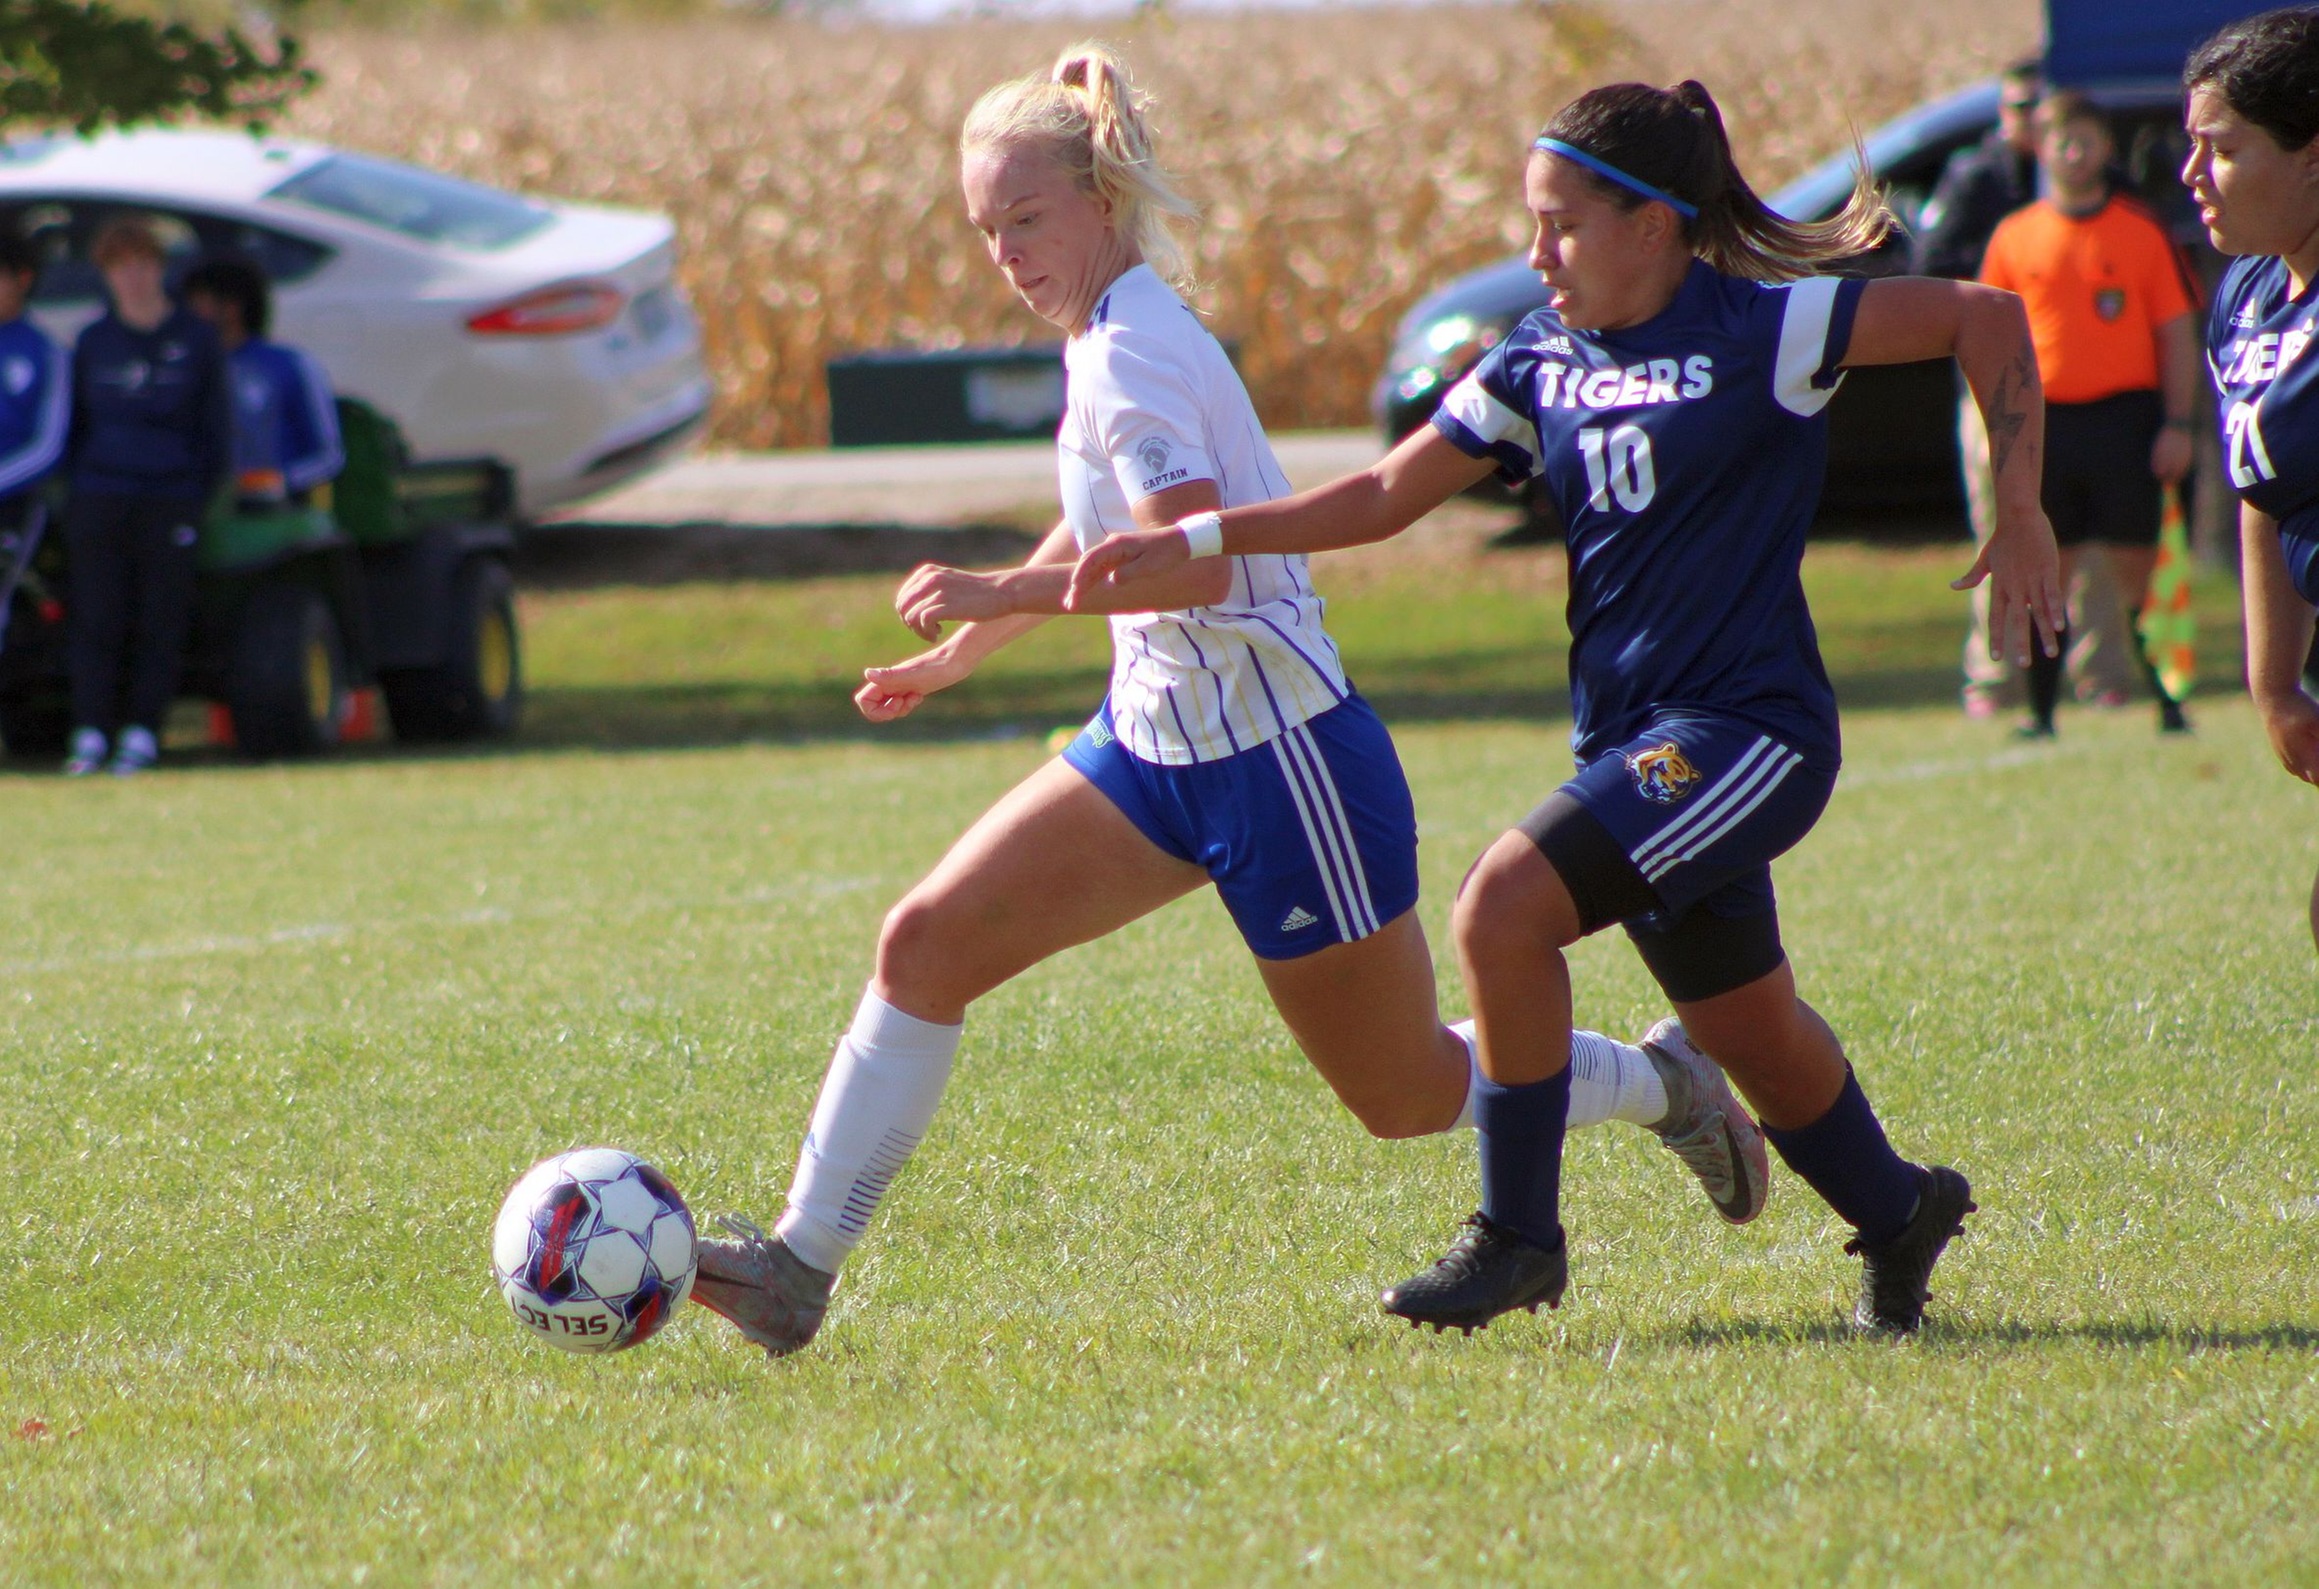 Sophomore Alina Turtschan moves the ball down the field in Wedesday's match against Marshalltown CC.